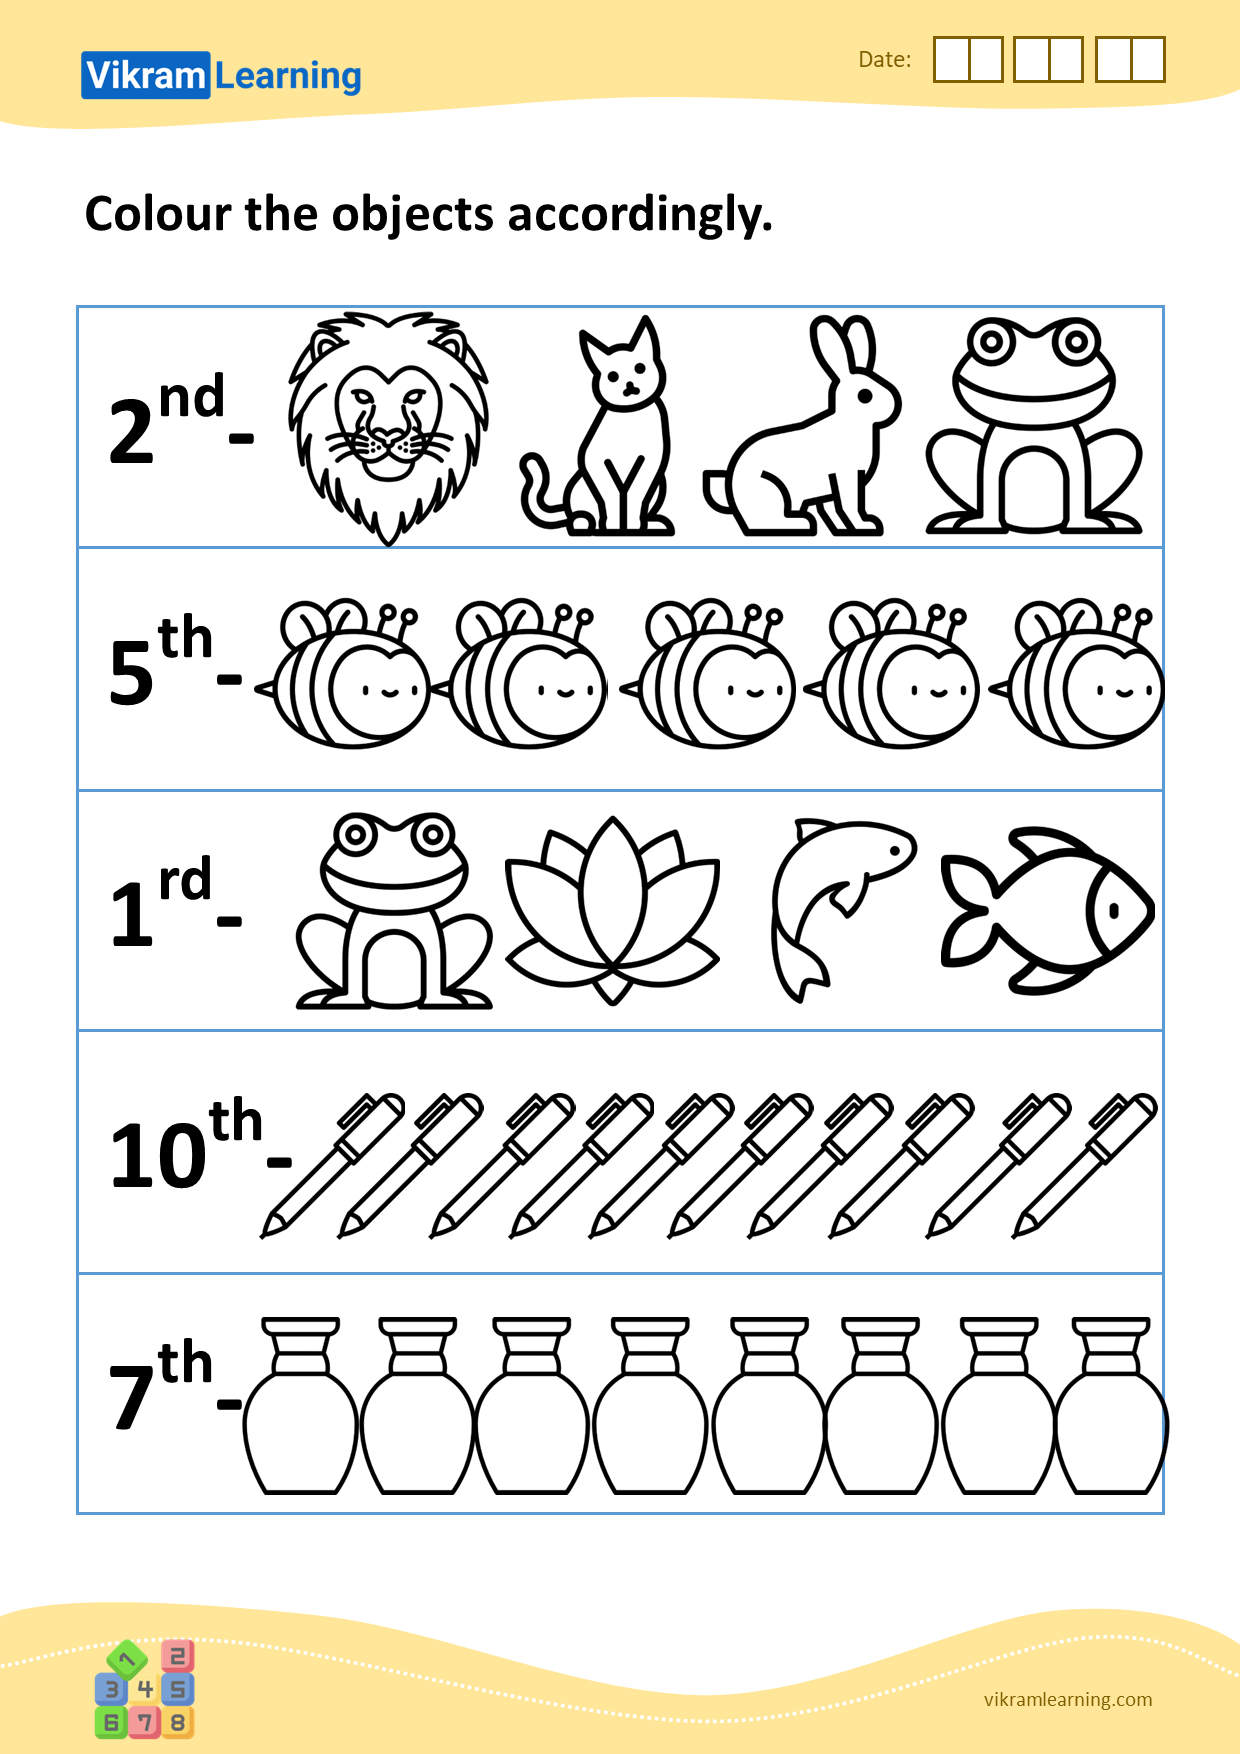 download-ordinal-numbers-up-to-10-worksheets-for-free-vikramlearning